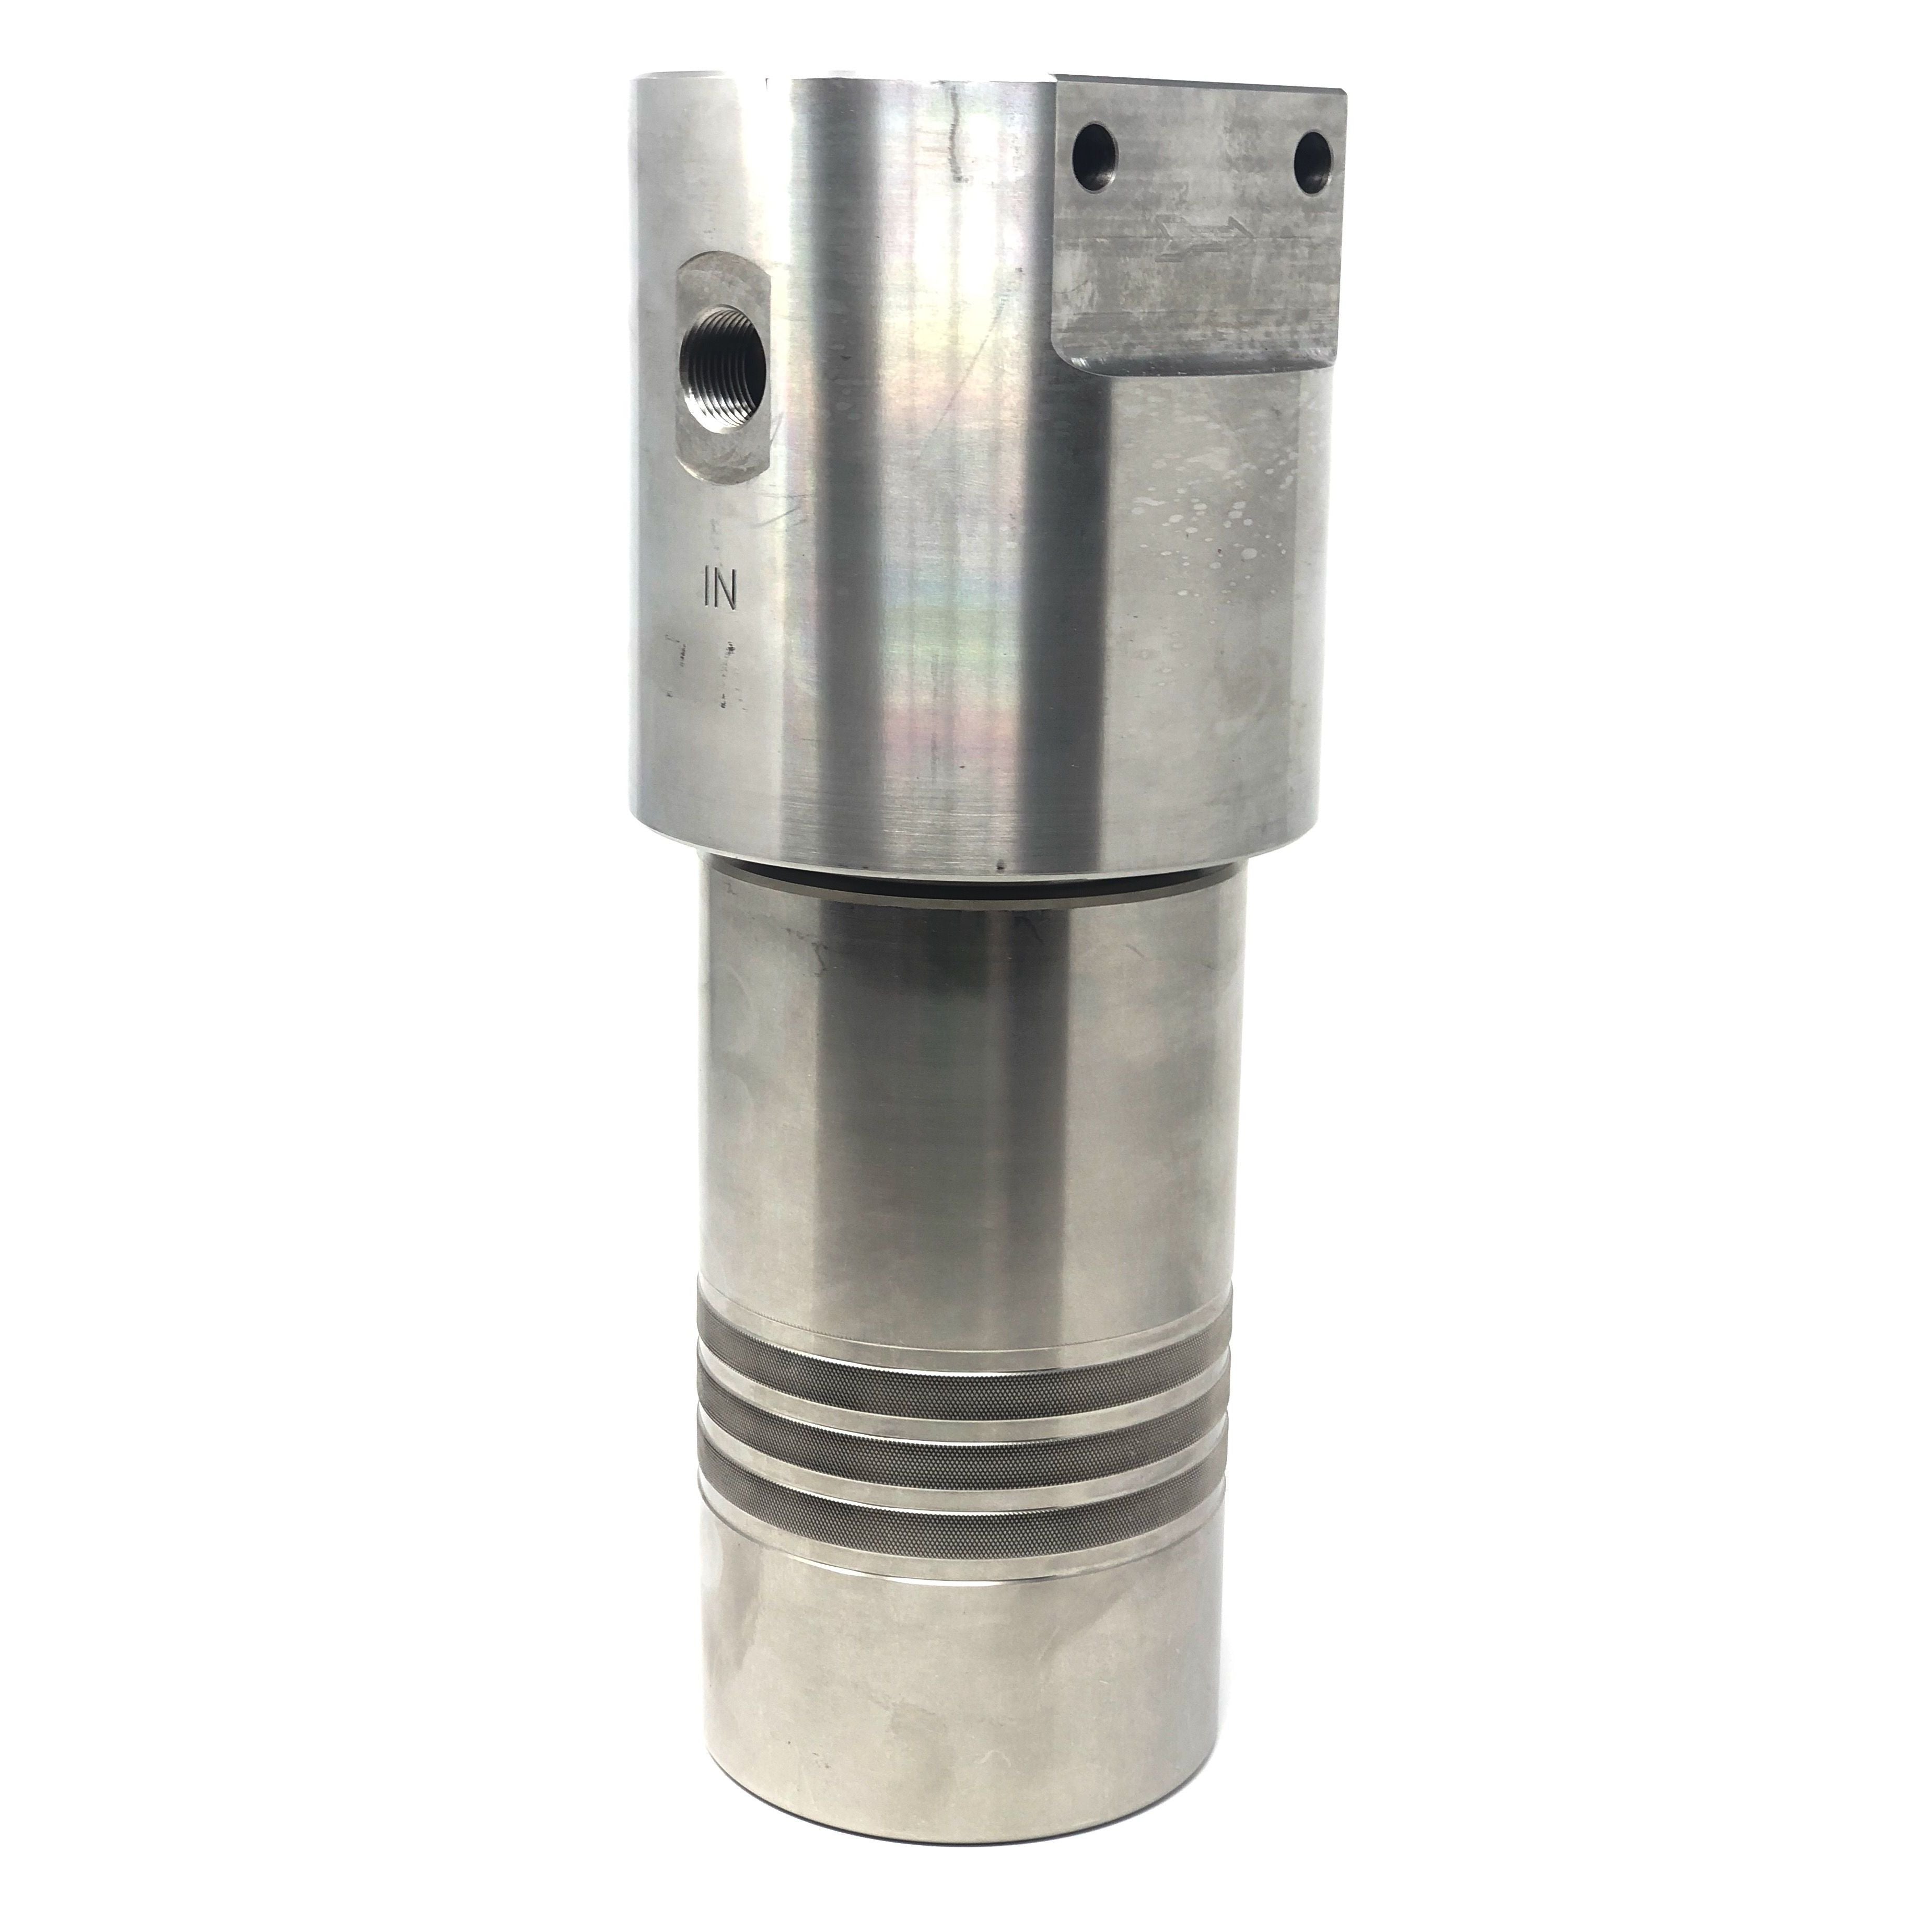 52S-2412N-18SEN : Chase Ultra High Pressure Inline Filter, 10000psi, 3/4" NPT, 18 Micron, With Visual Indicator, No Bypass